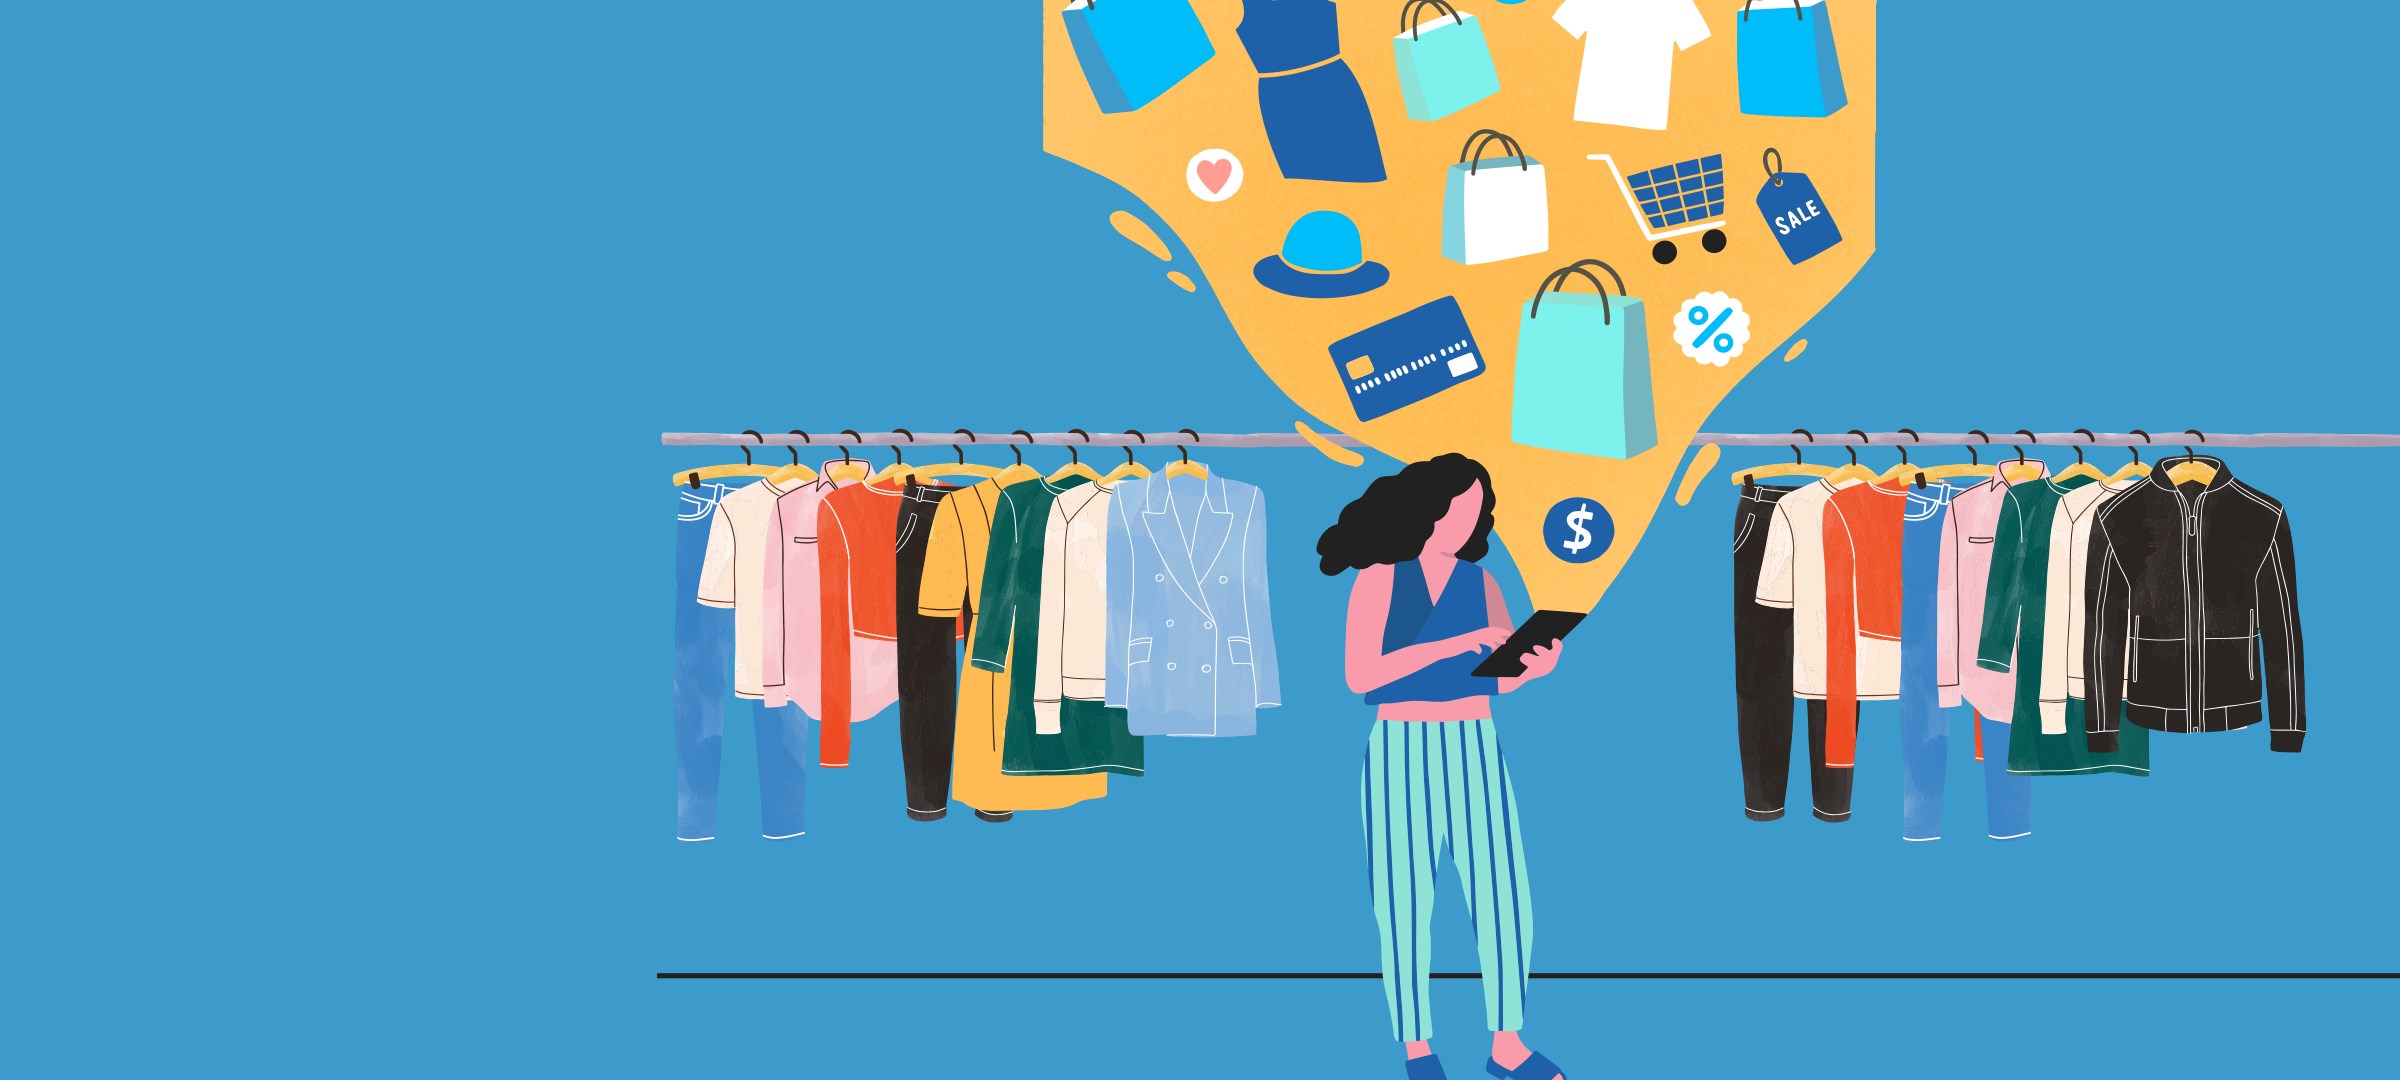 Beyond a Mere Transaction - 
Future of Retail Series part 3: Retail Experience